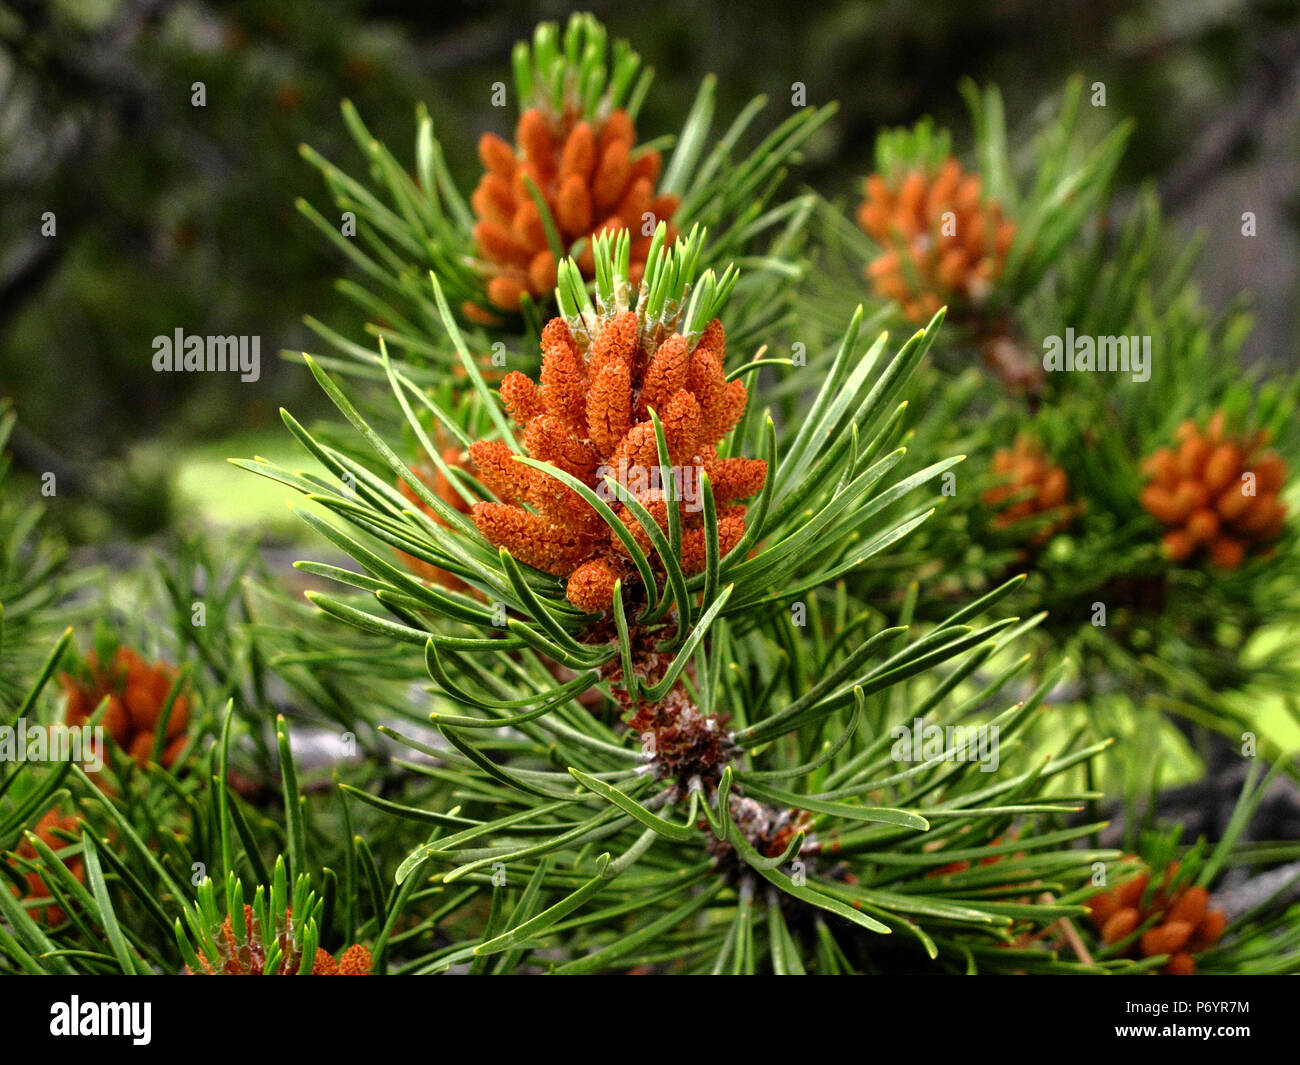 New Growing Pine Cones of the Lodgepole Pine Tree in the Uintah Range of  the Western Rocky Mountains Stock Photo - Alamy